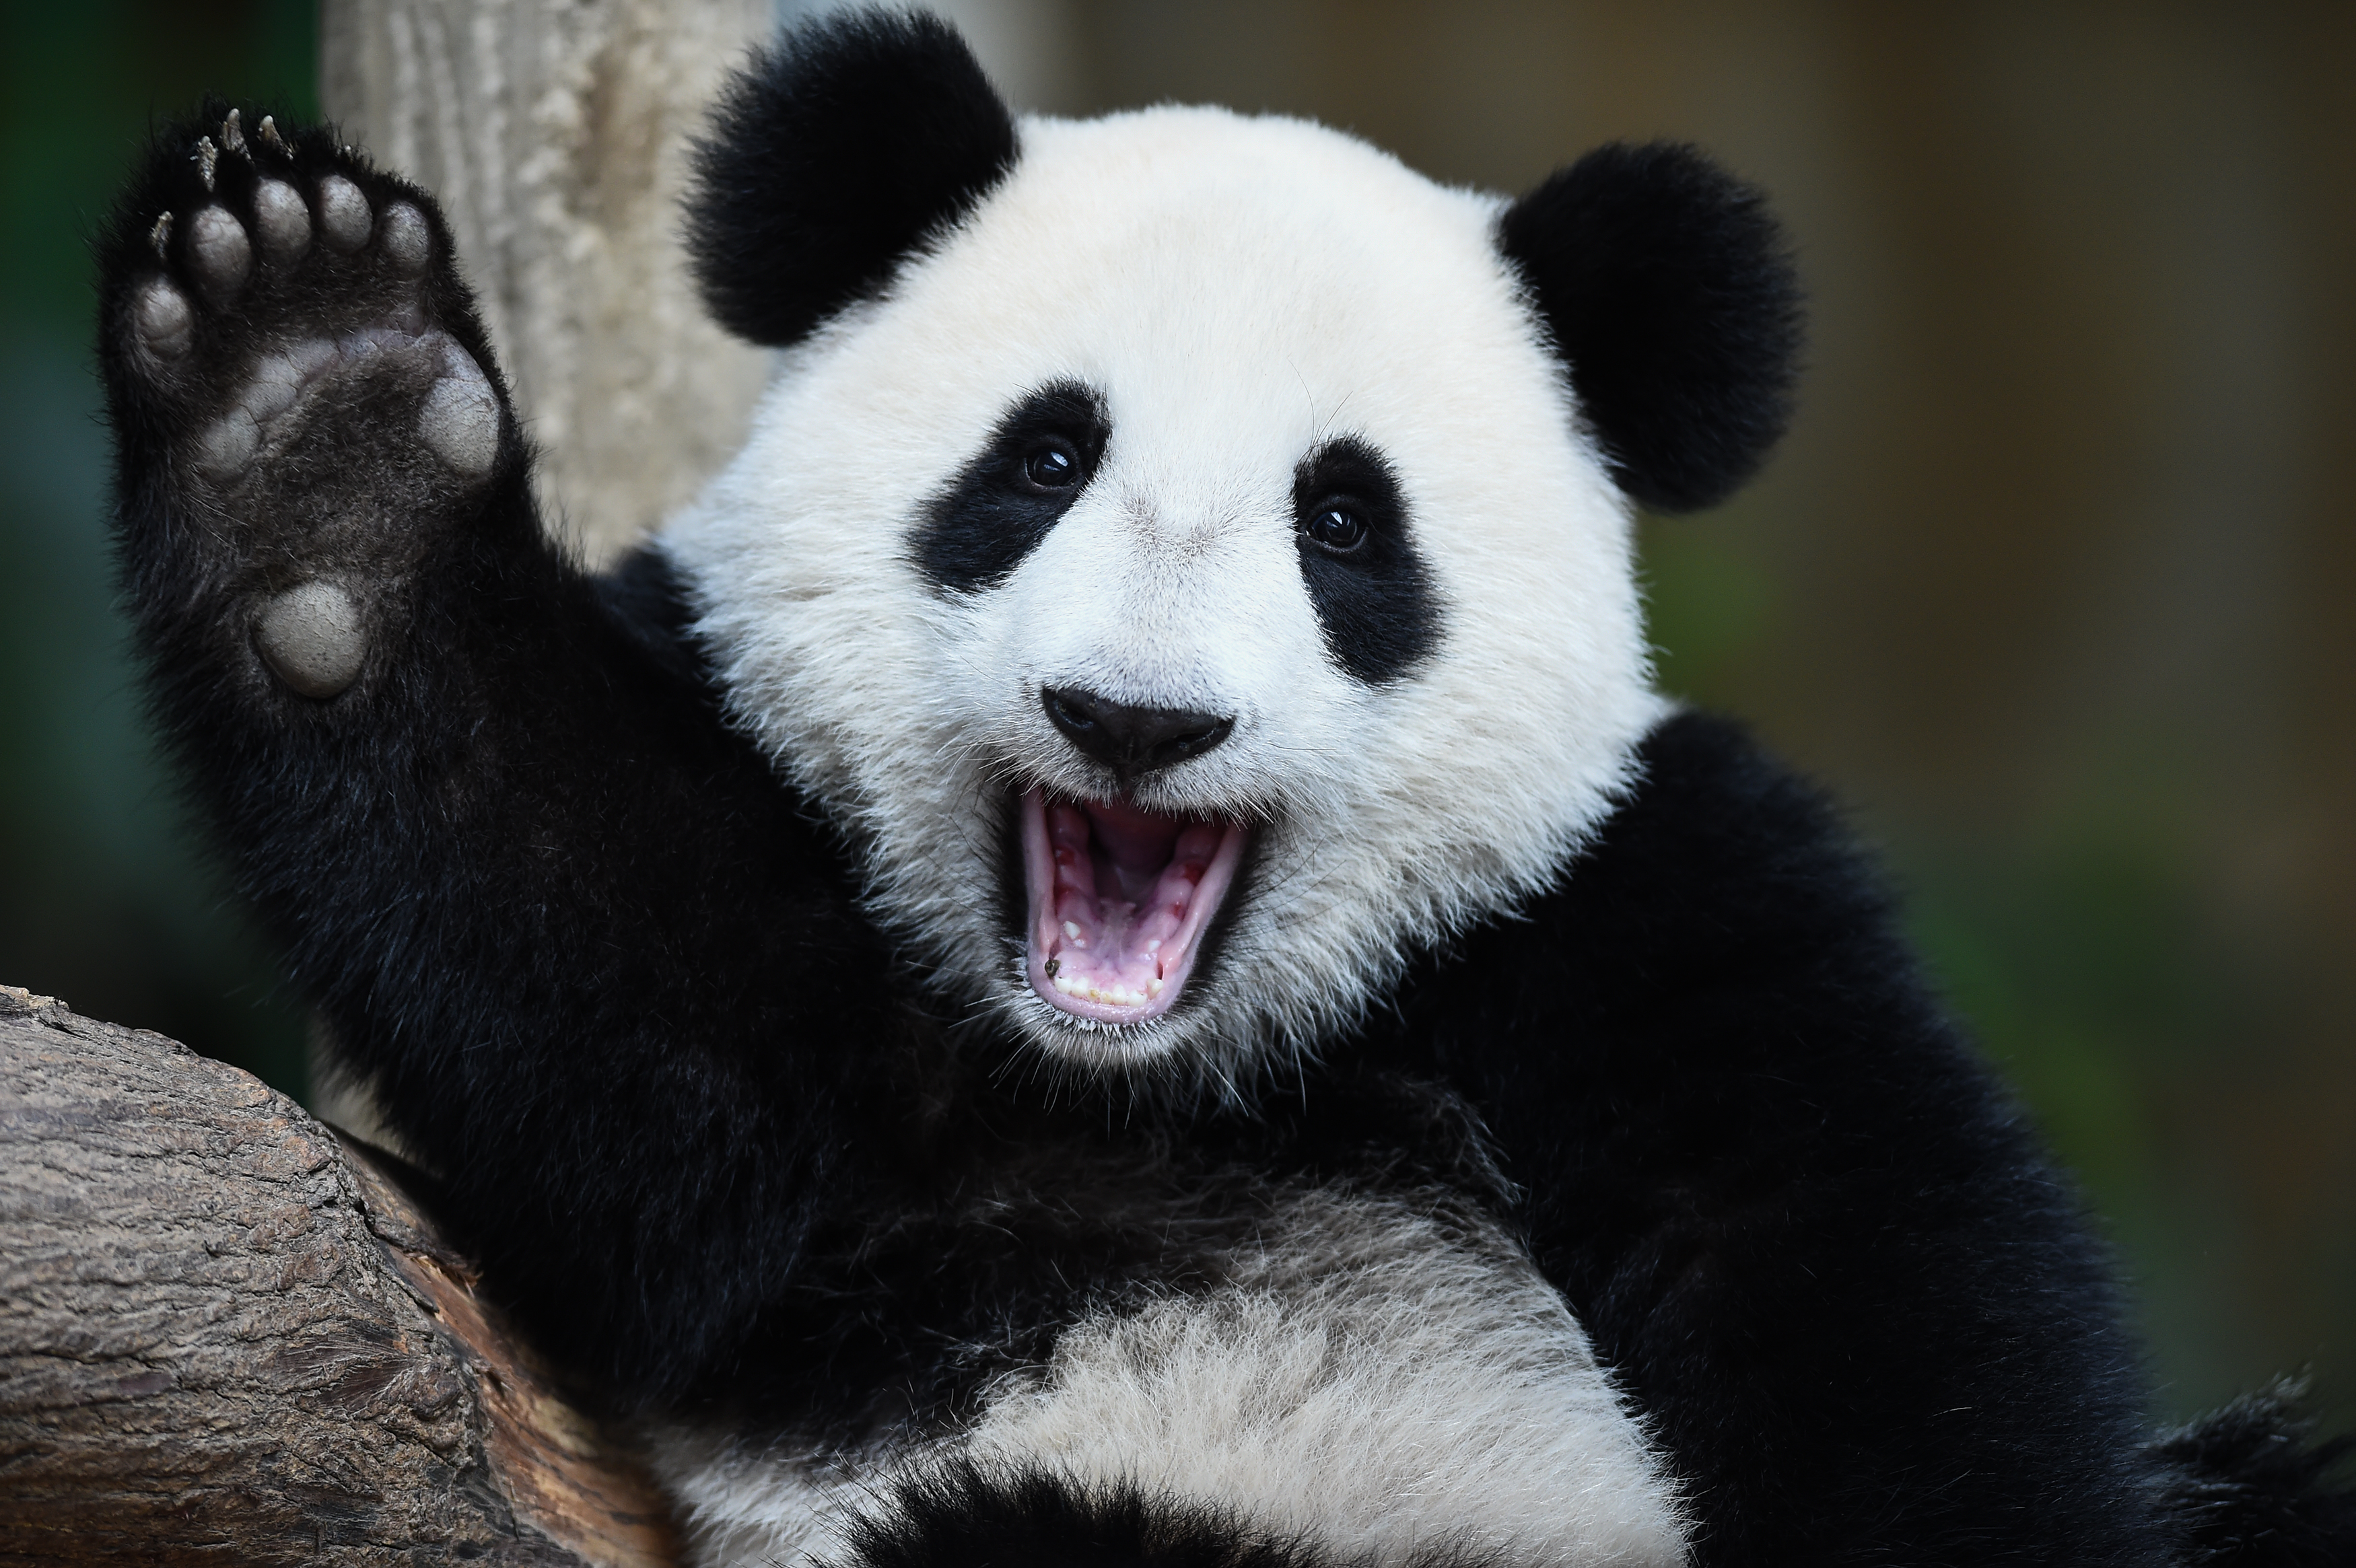 One-year-old female giant panda cub Nuan Nuan reacts inside her enclosure during joint birthday celebrations for the panda and its ten-year-old mother Liang Liang at the National Zoo in Kuala Lumpur on August 23, 2016. Giant pandas Liang Liang, aged 10, and her Malaysian-born cub Nuan Nuan, 1, were born on August 23, 2006 and August 18, 2015 respectivetly. / AFP PHOTO / MOHD RASFAN